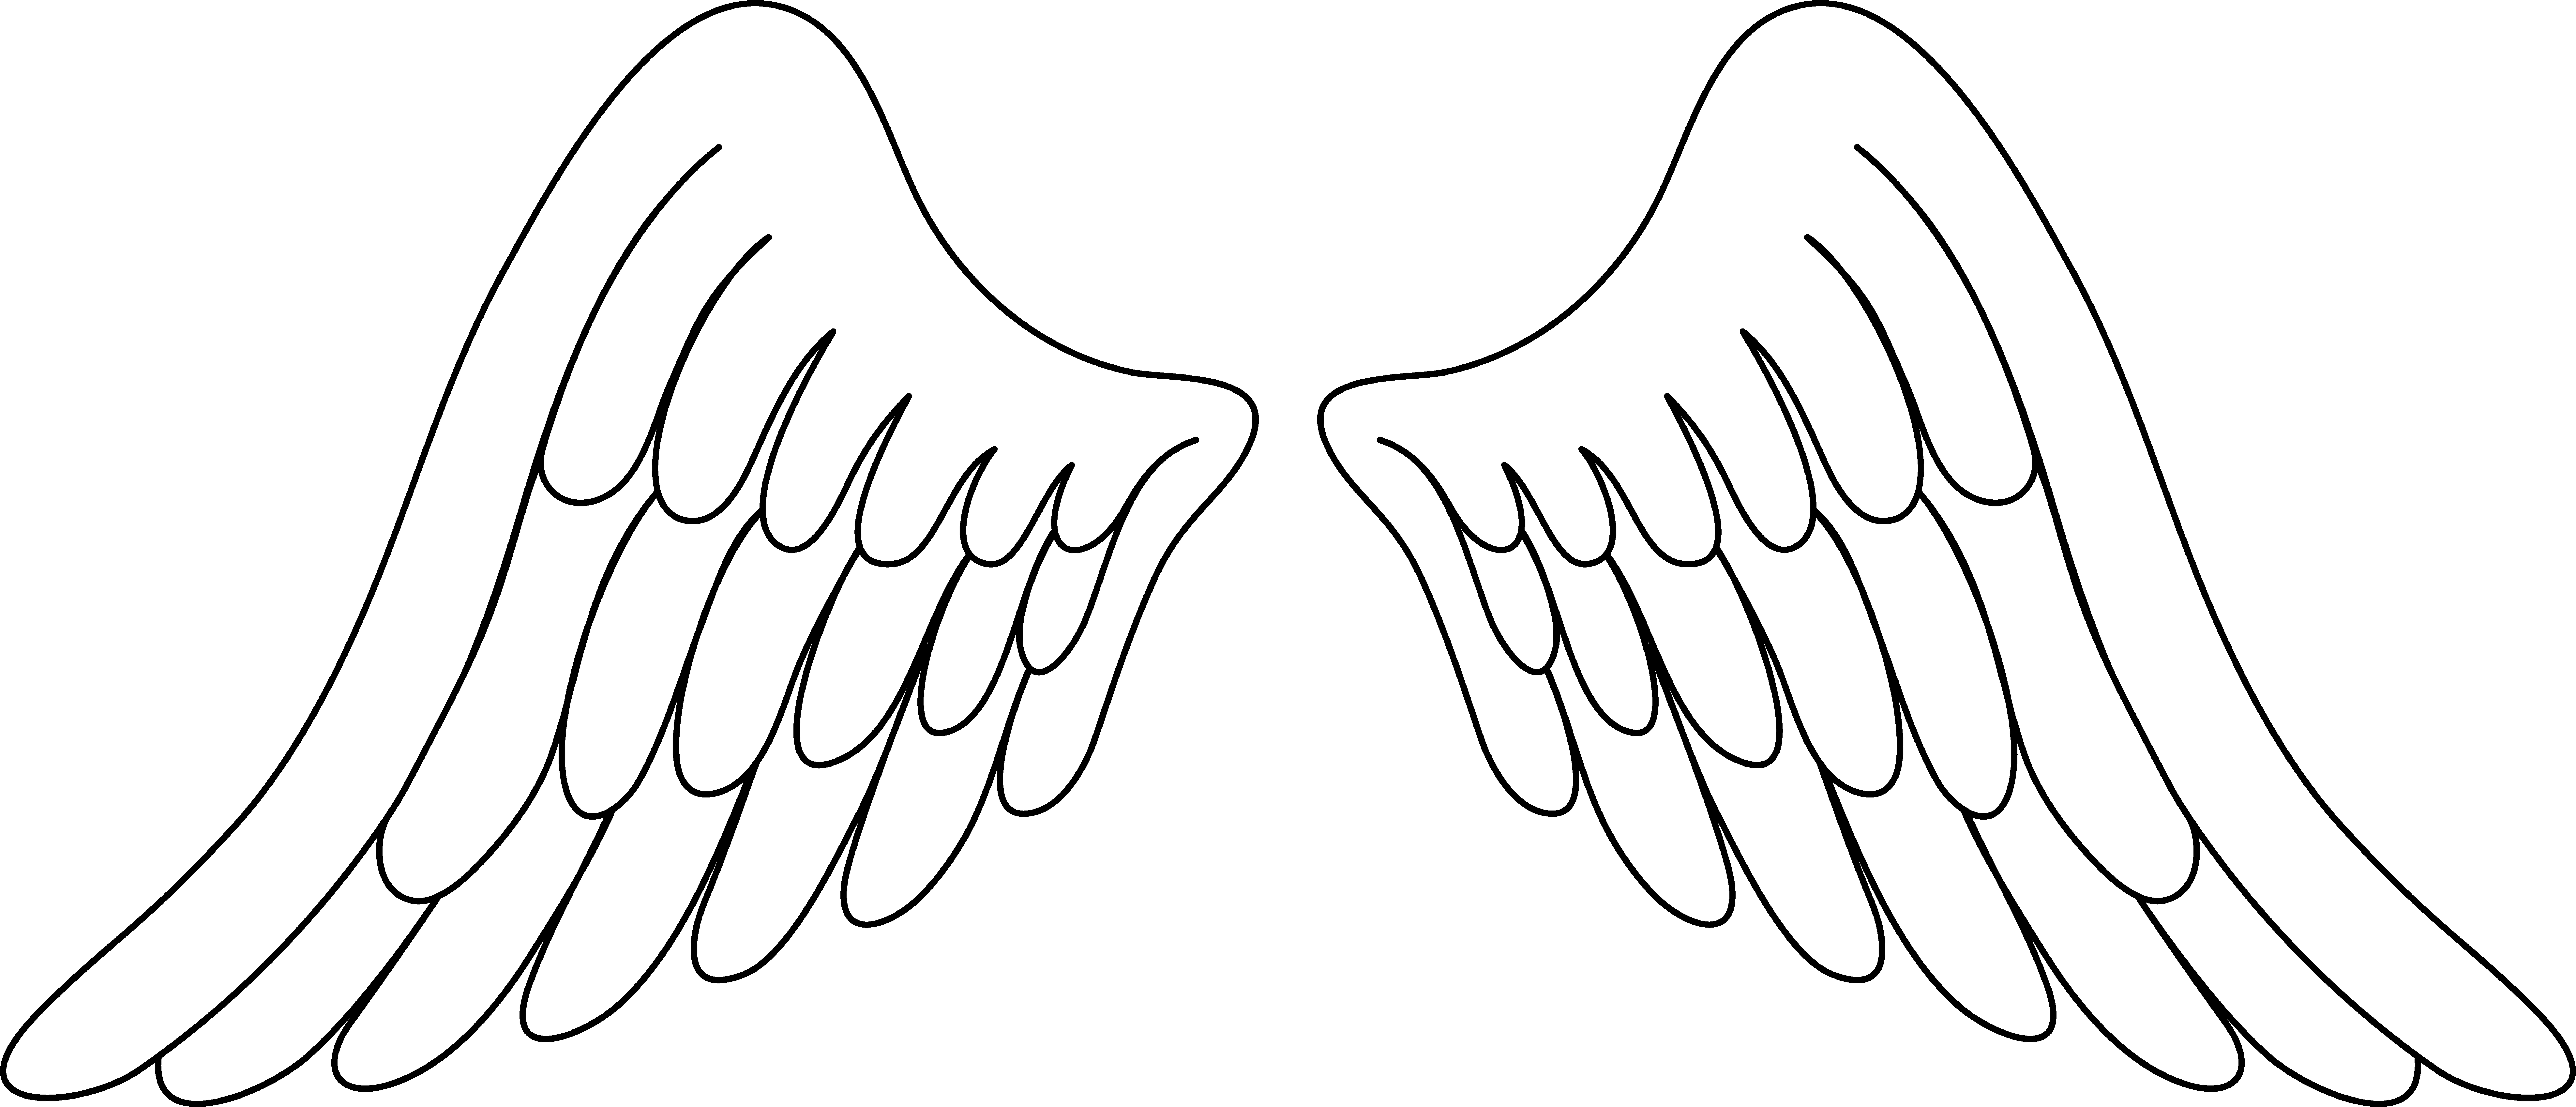 Nails clipart wood clipart. Angel wings wing clip